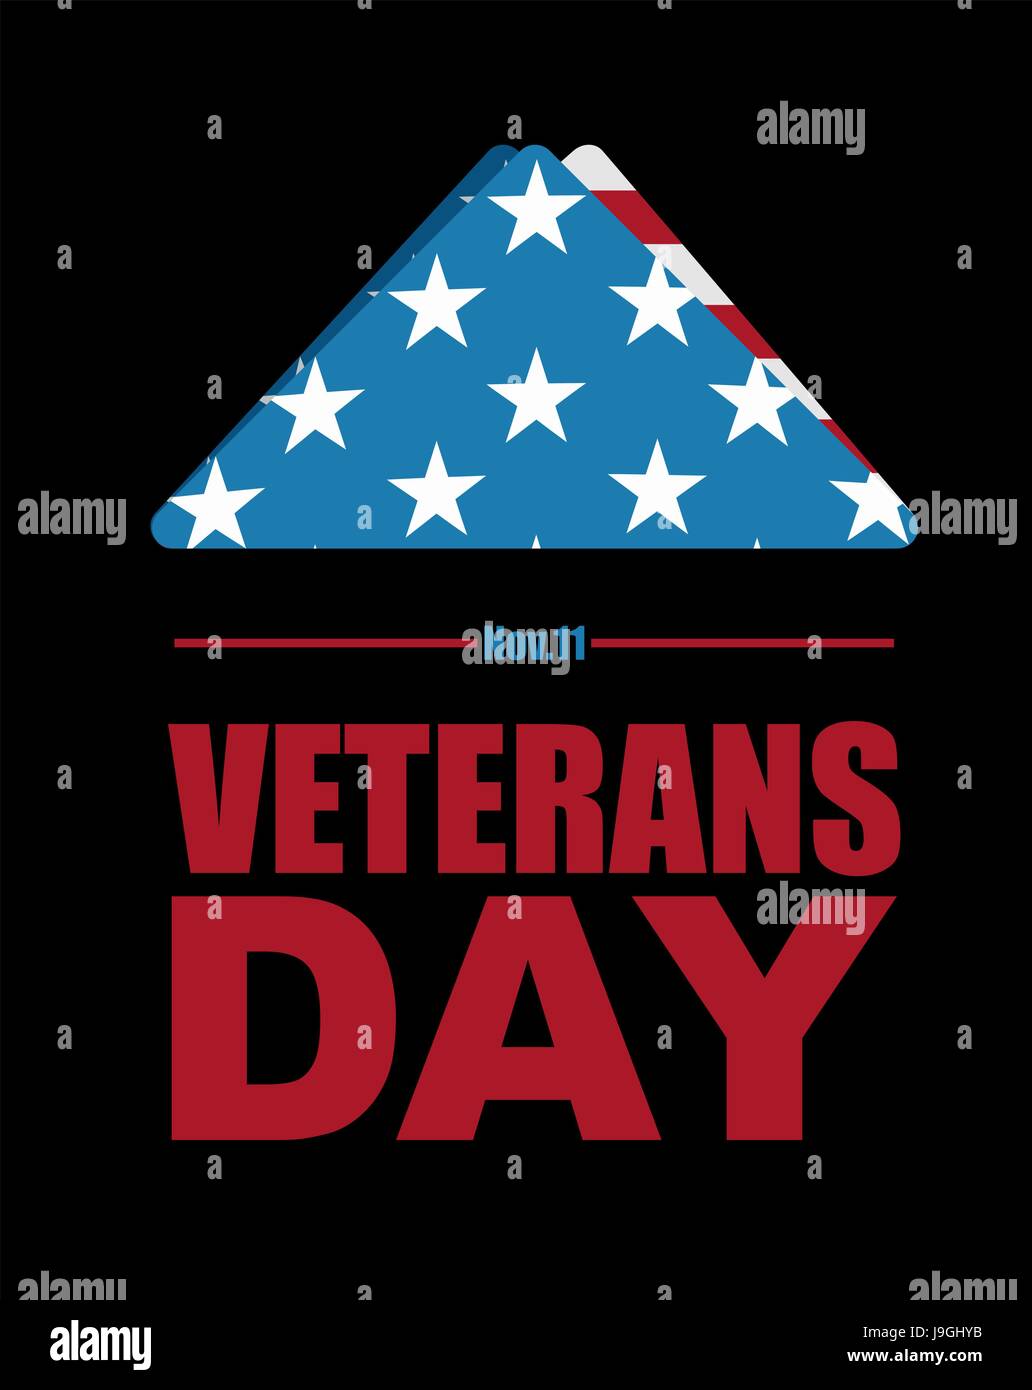 Veterans Day. USA flag symbol of mourning and grief for fallen soldiers. Emblem for national patriotic holiday. United States Flag folded in triangle. Stock Vector